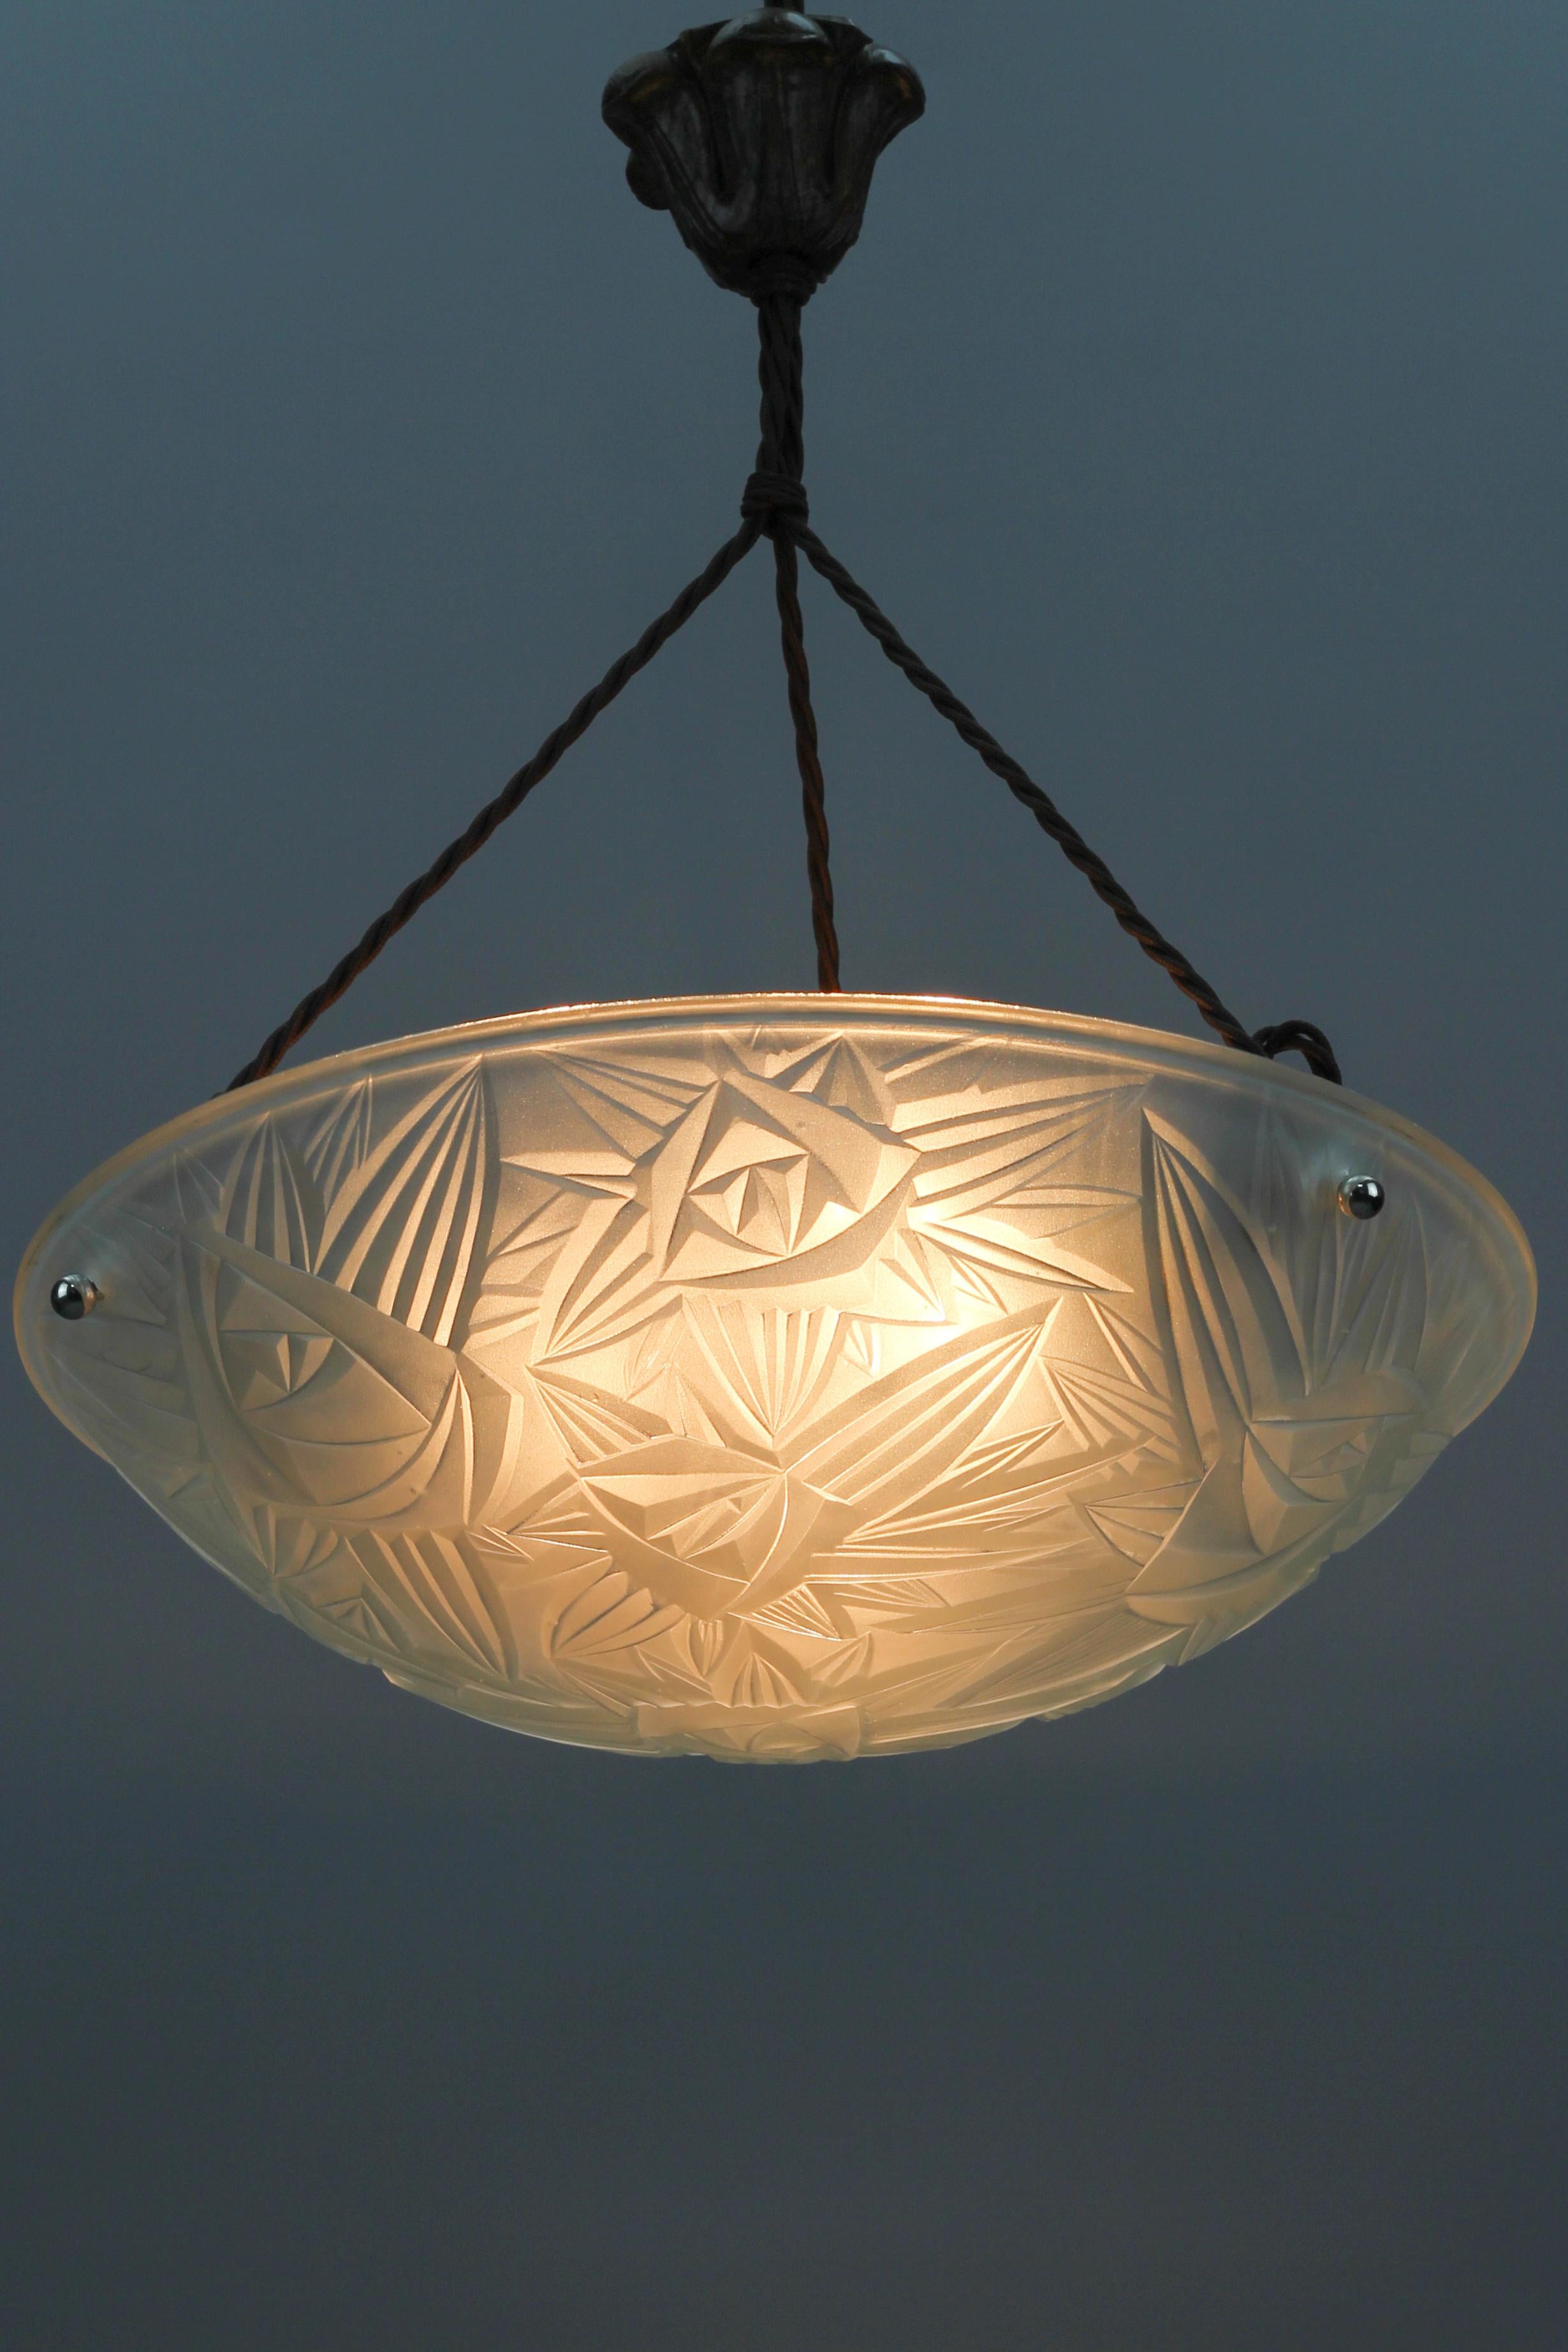 Beautiful French Art Deco three-light pendant light fixture with frosted pressed glass shade by Jean Noverdy; marked on edge ”Noverdy France Depose”.
Beautifully shaped white frosted glass bowl features stylized flower and leaf decoration, hung at